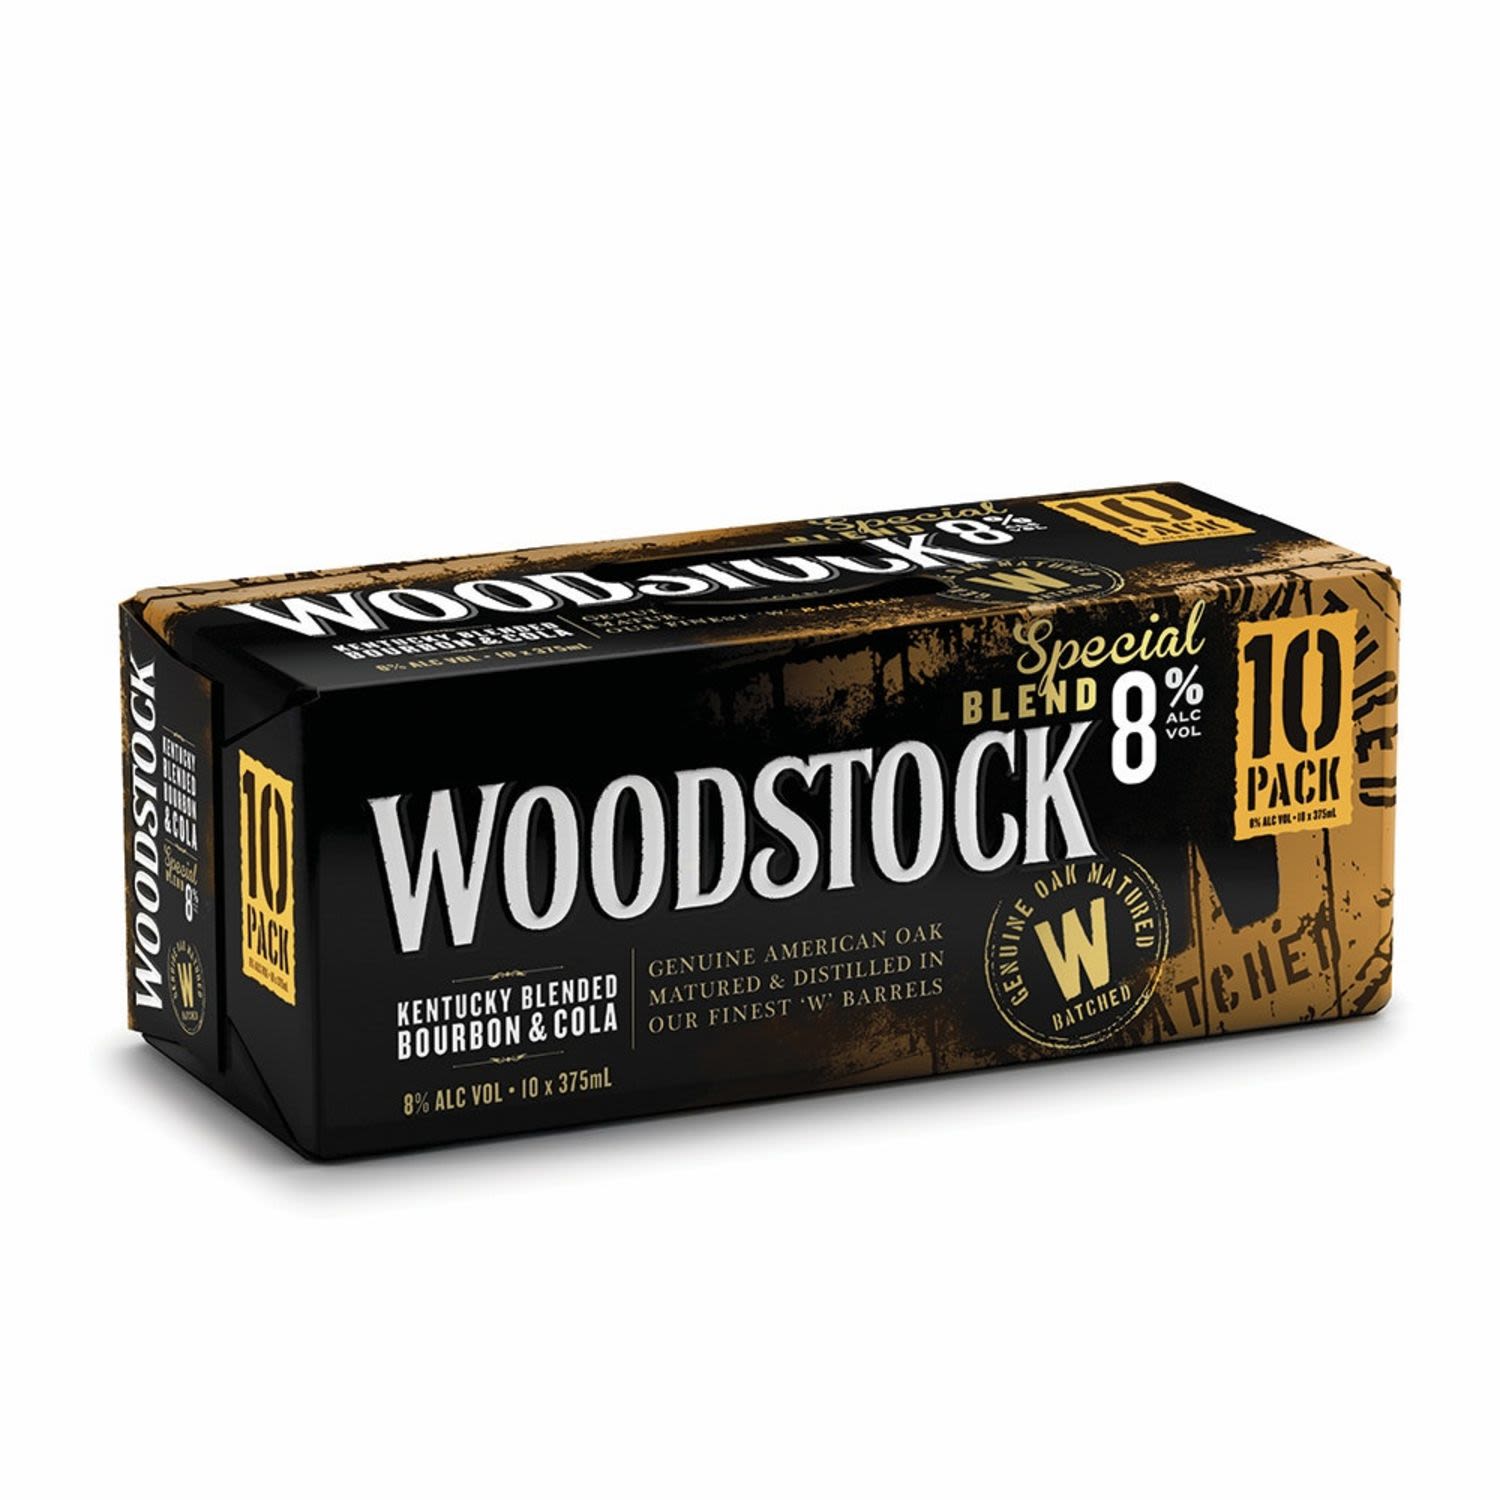 Woodstock Bourbon & Cola 8% Can 375mL 10 Pack